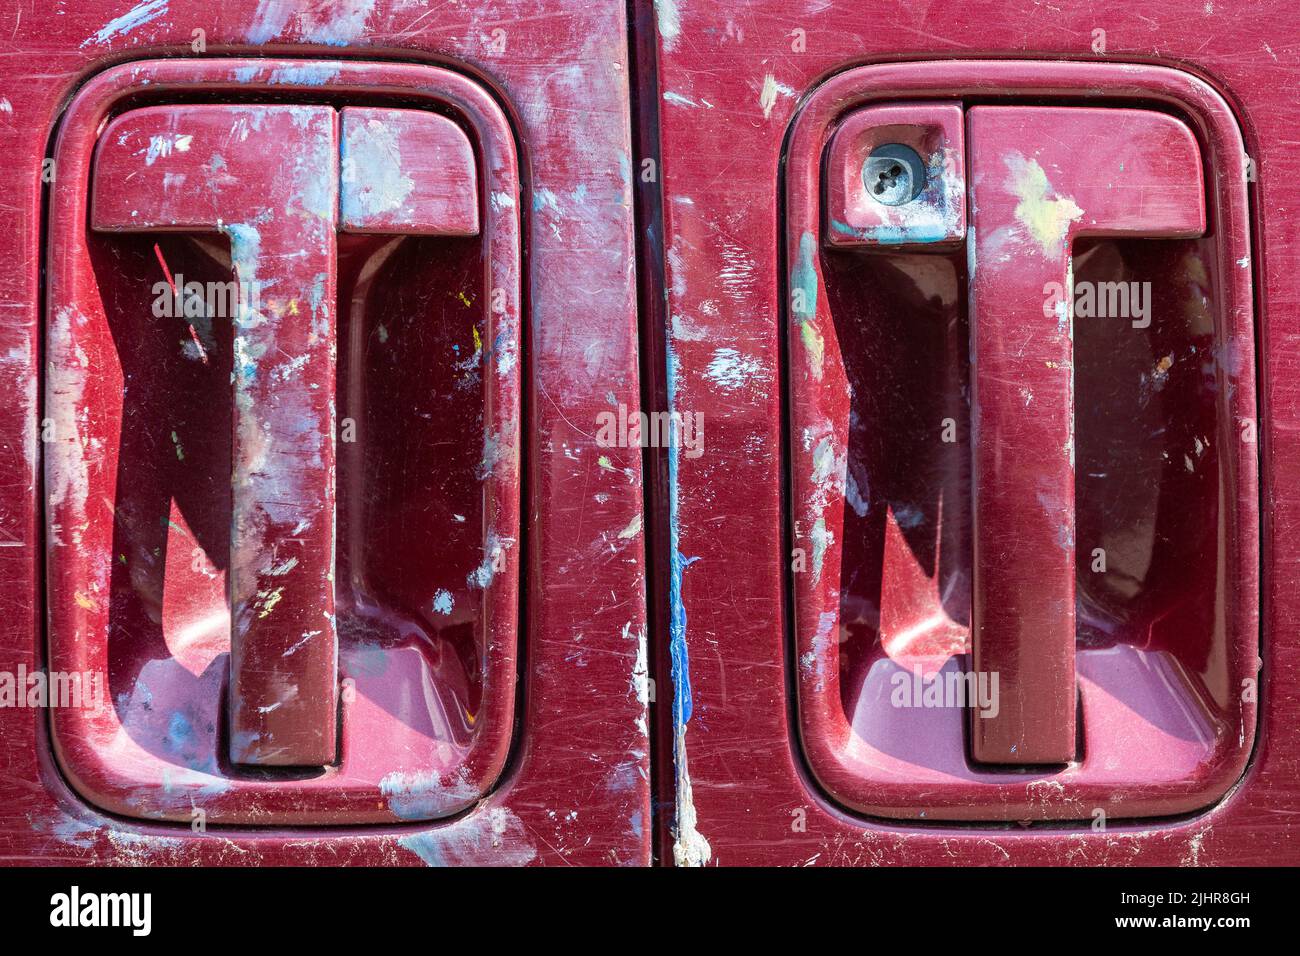 Two red car door handles, stained with white marks. Stock Photo